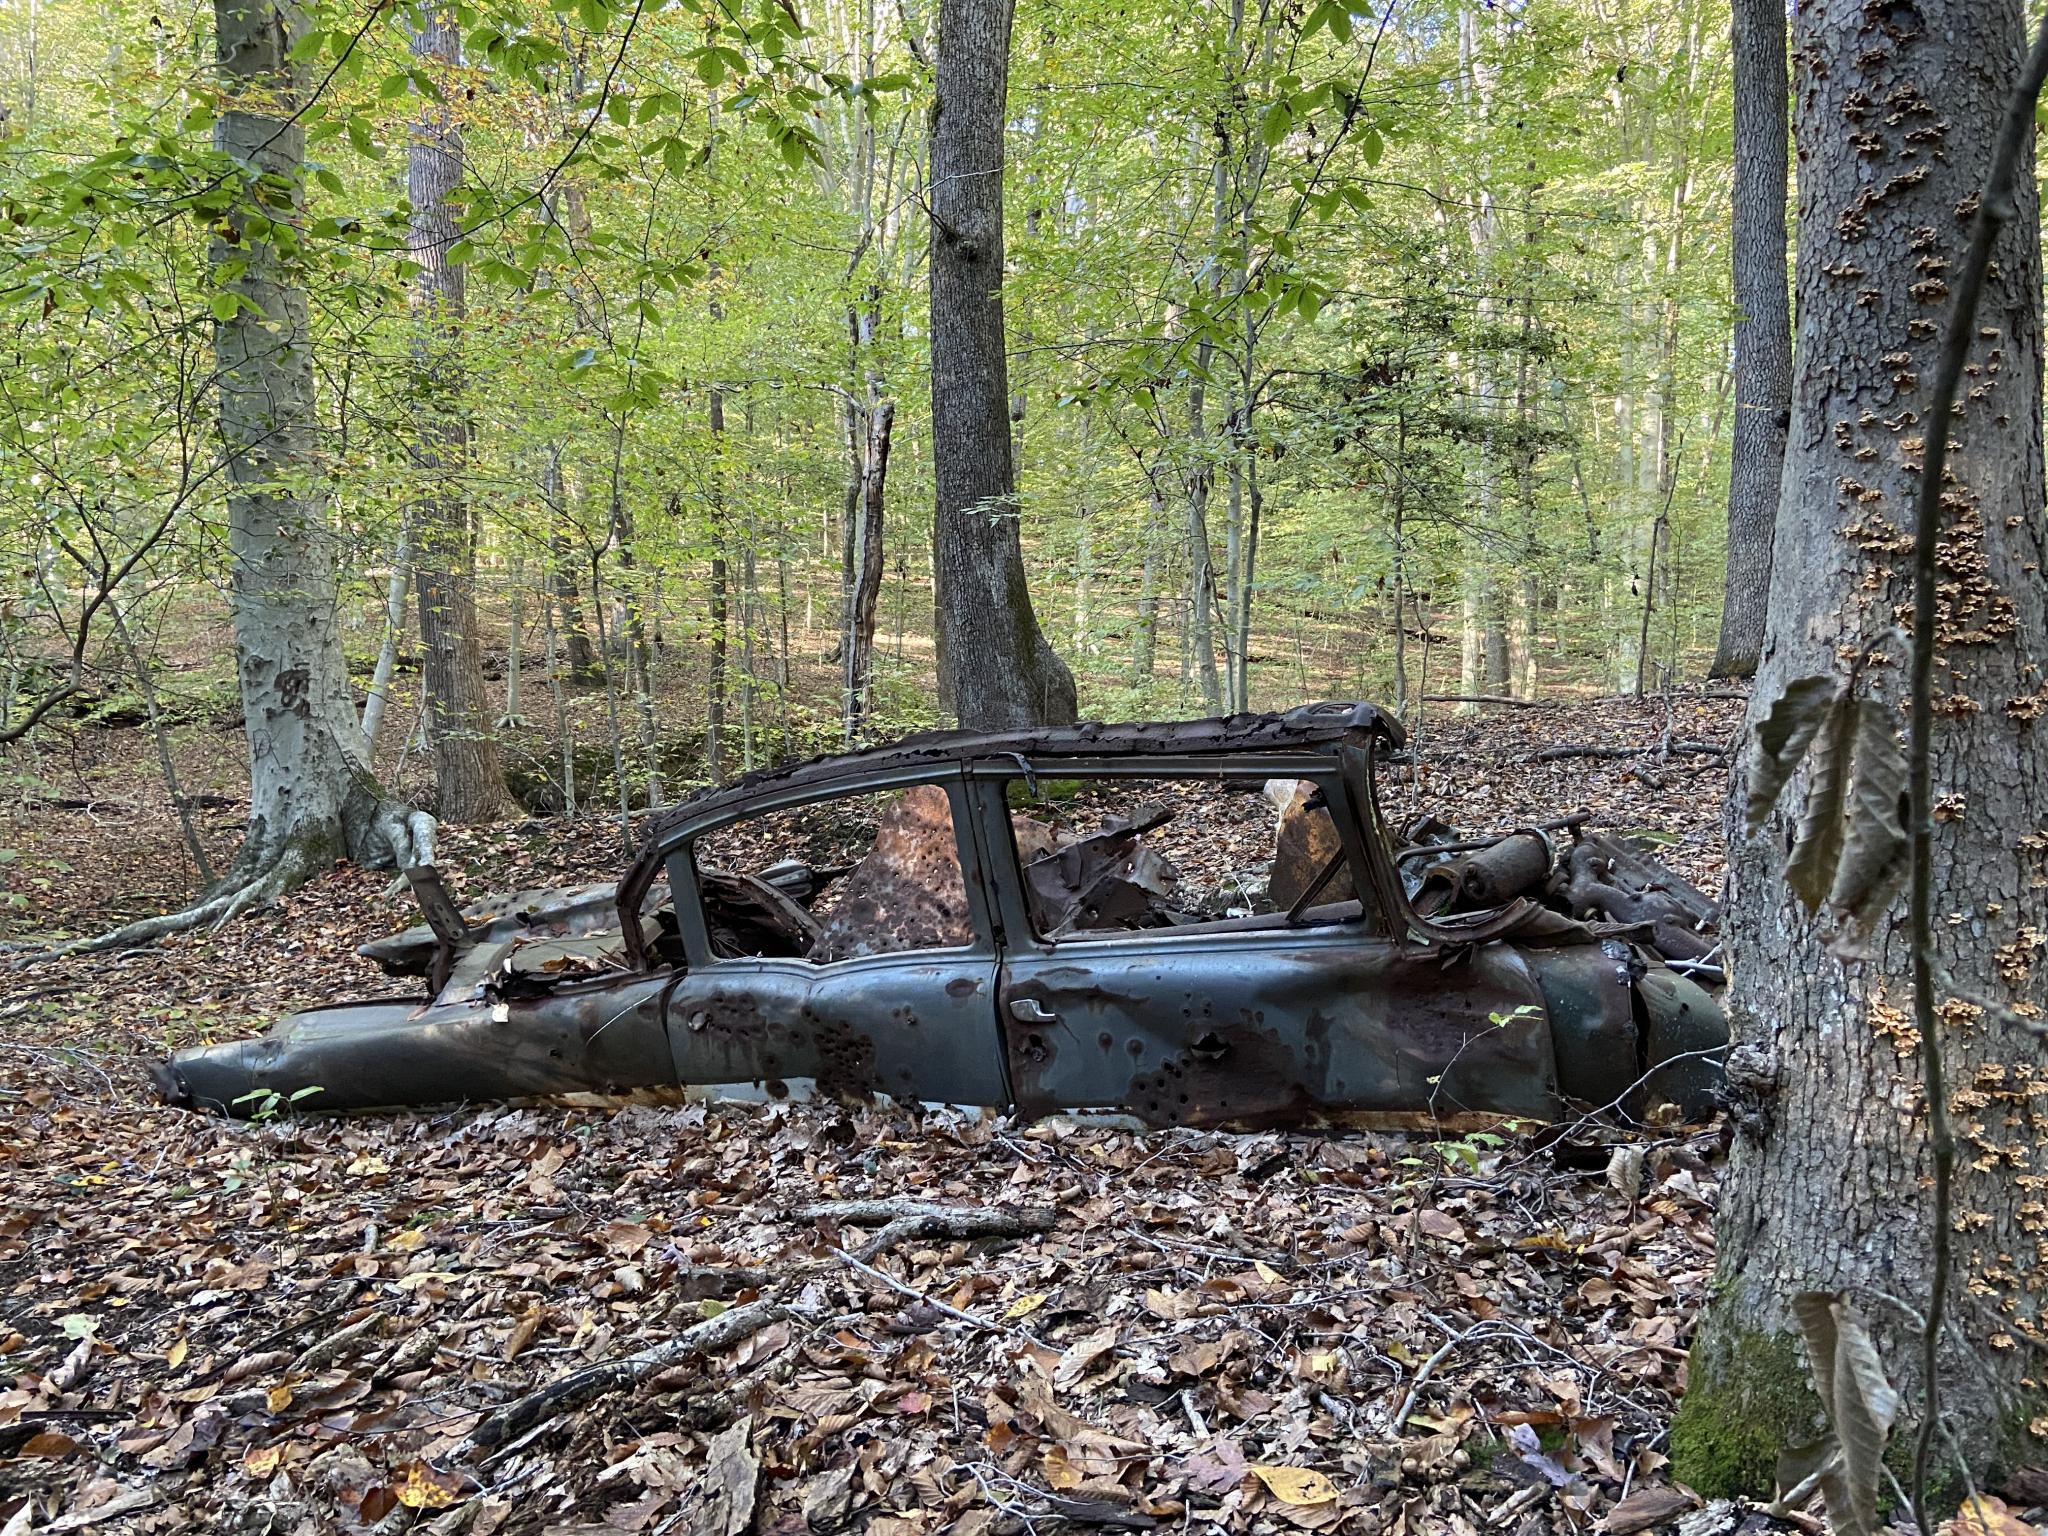 Abandoned cars picture thread-img_8287-jpg